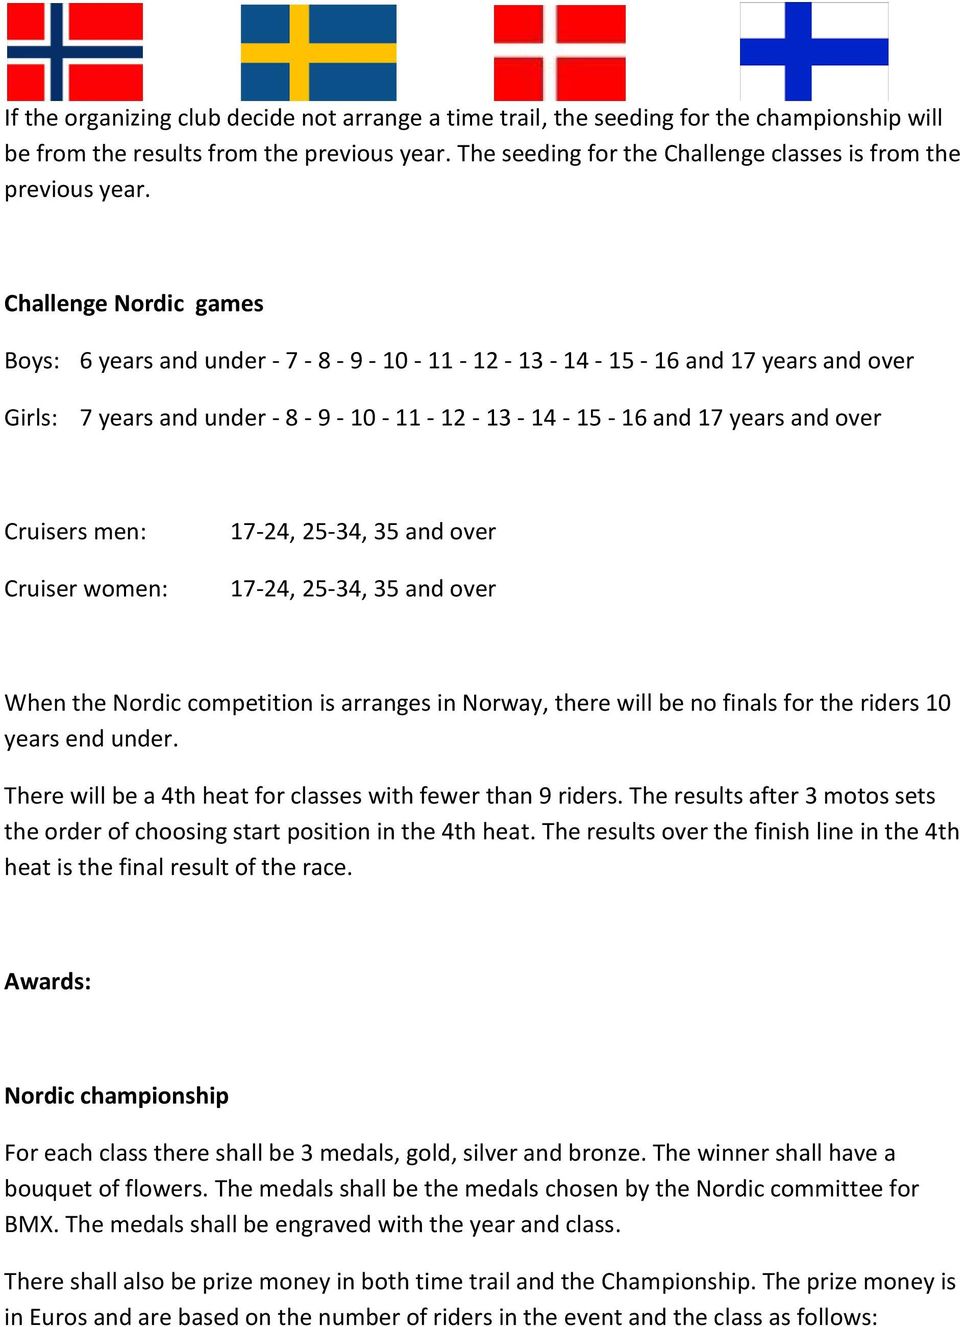 Challenge Nordic games Boys: 6 years and under - 7-8 - 9-10 - 11-12 - 13-14 - 15-16 and 17 years and over Girls: 7 years and under - 8-9 - 10-11 - 12-13 - 14-15 - 16 and 17 years and over Cruisers